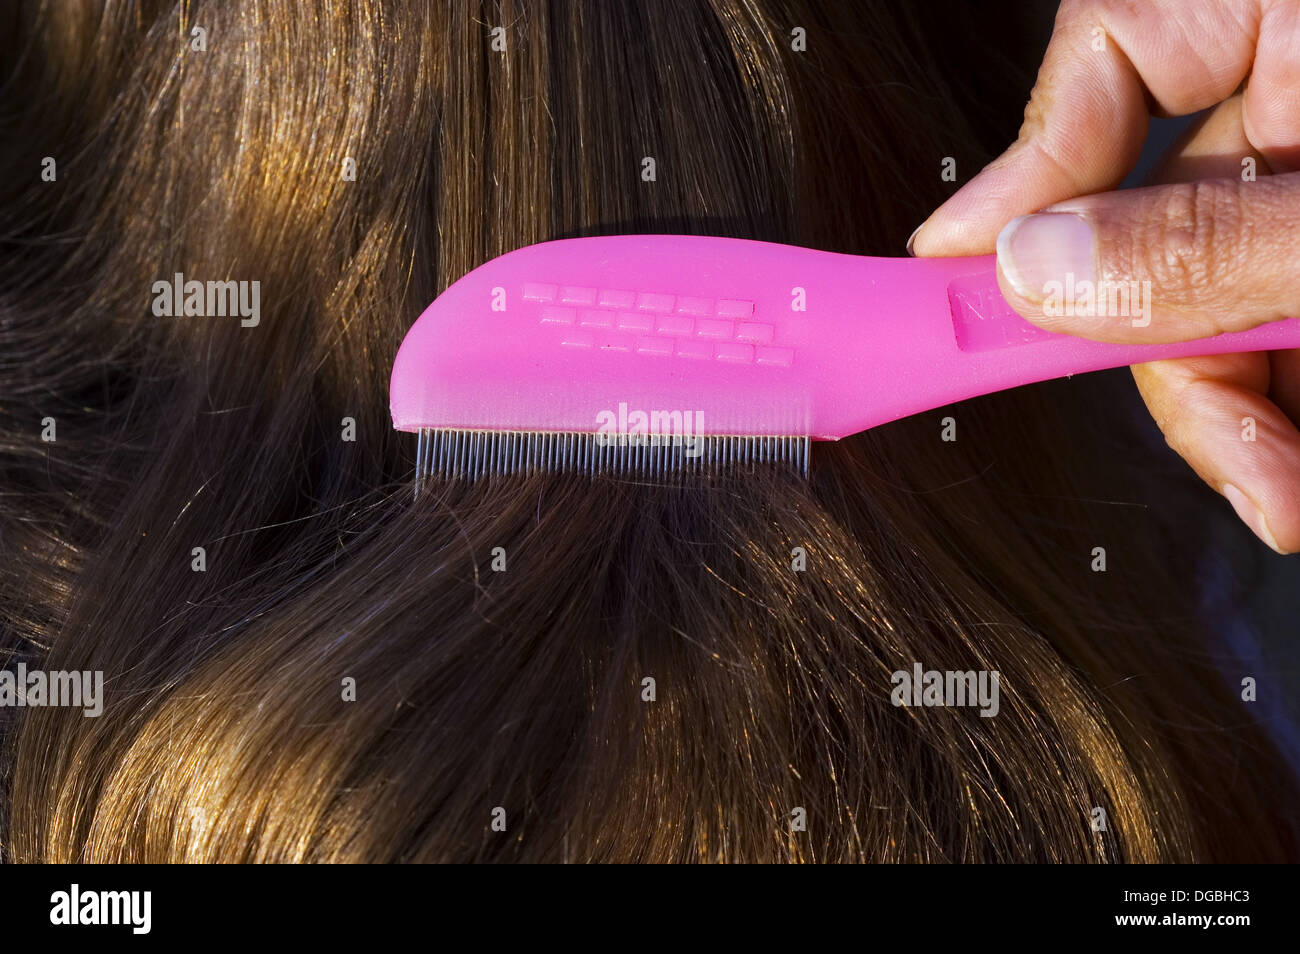 8. How to Properly Use a Nit Comb on Blonde Hair - wide 10